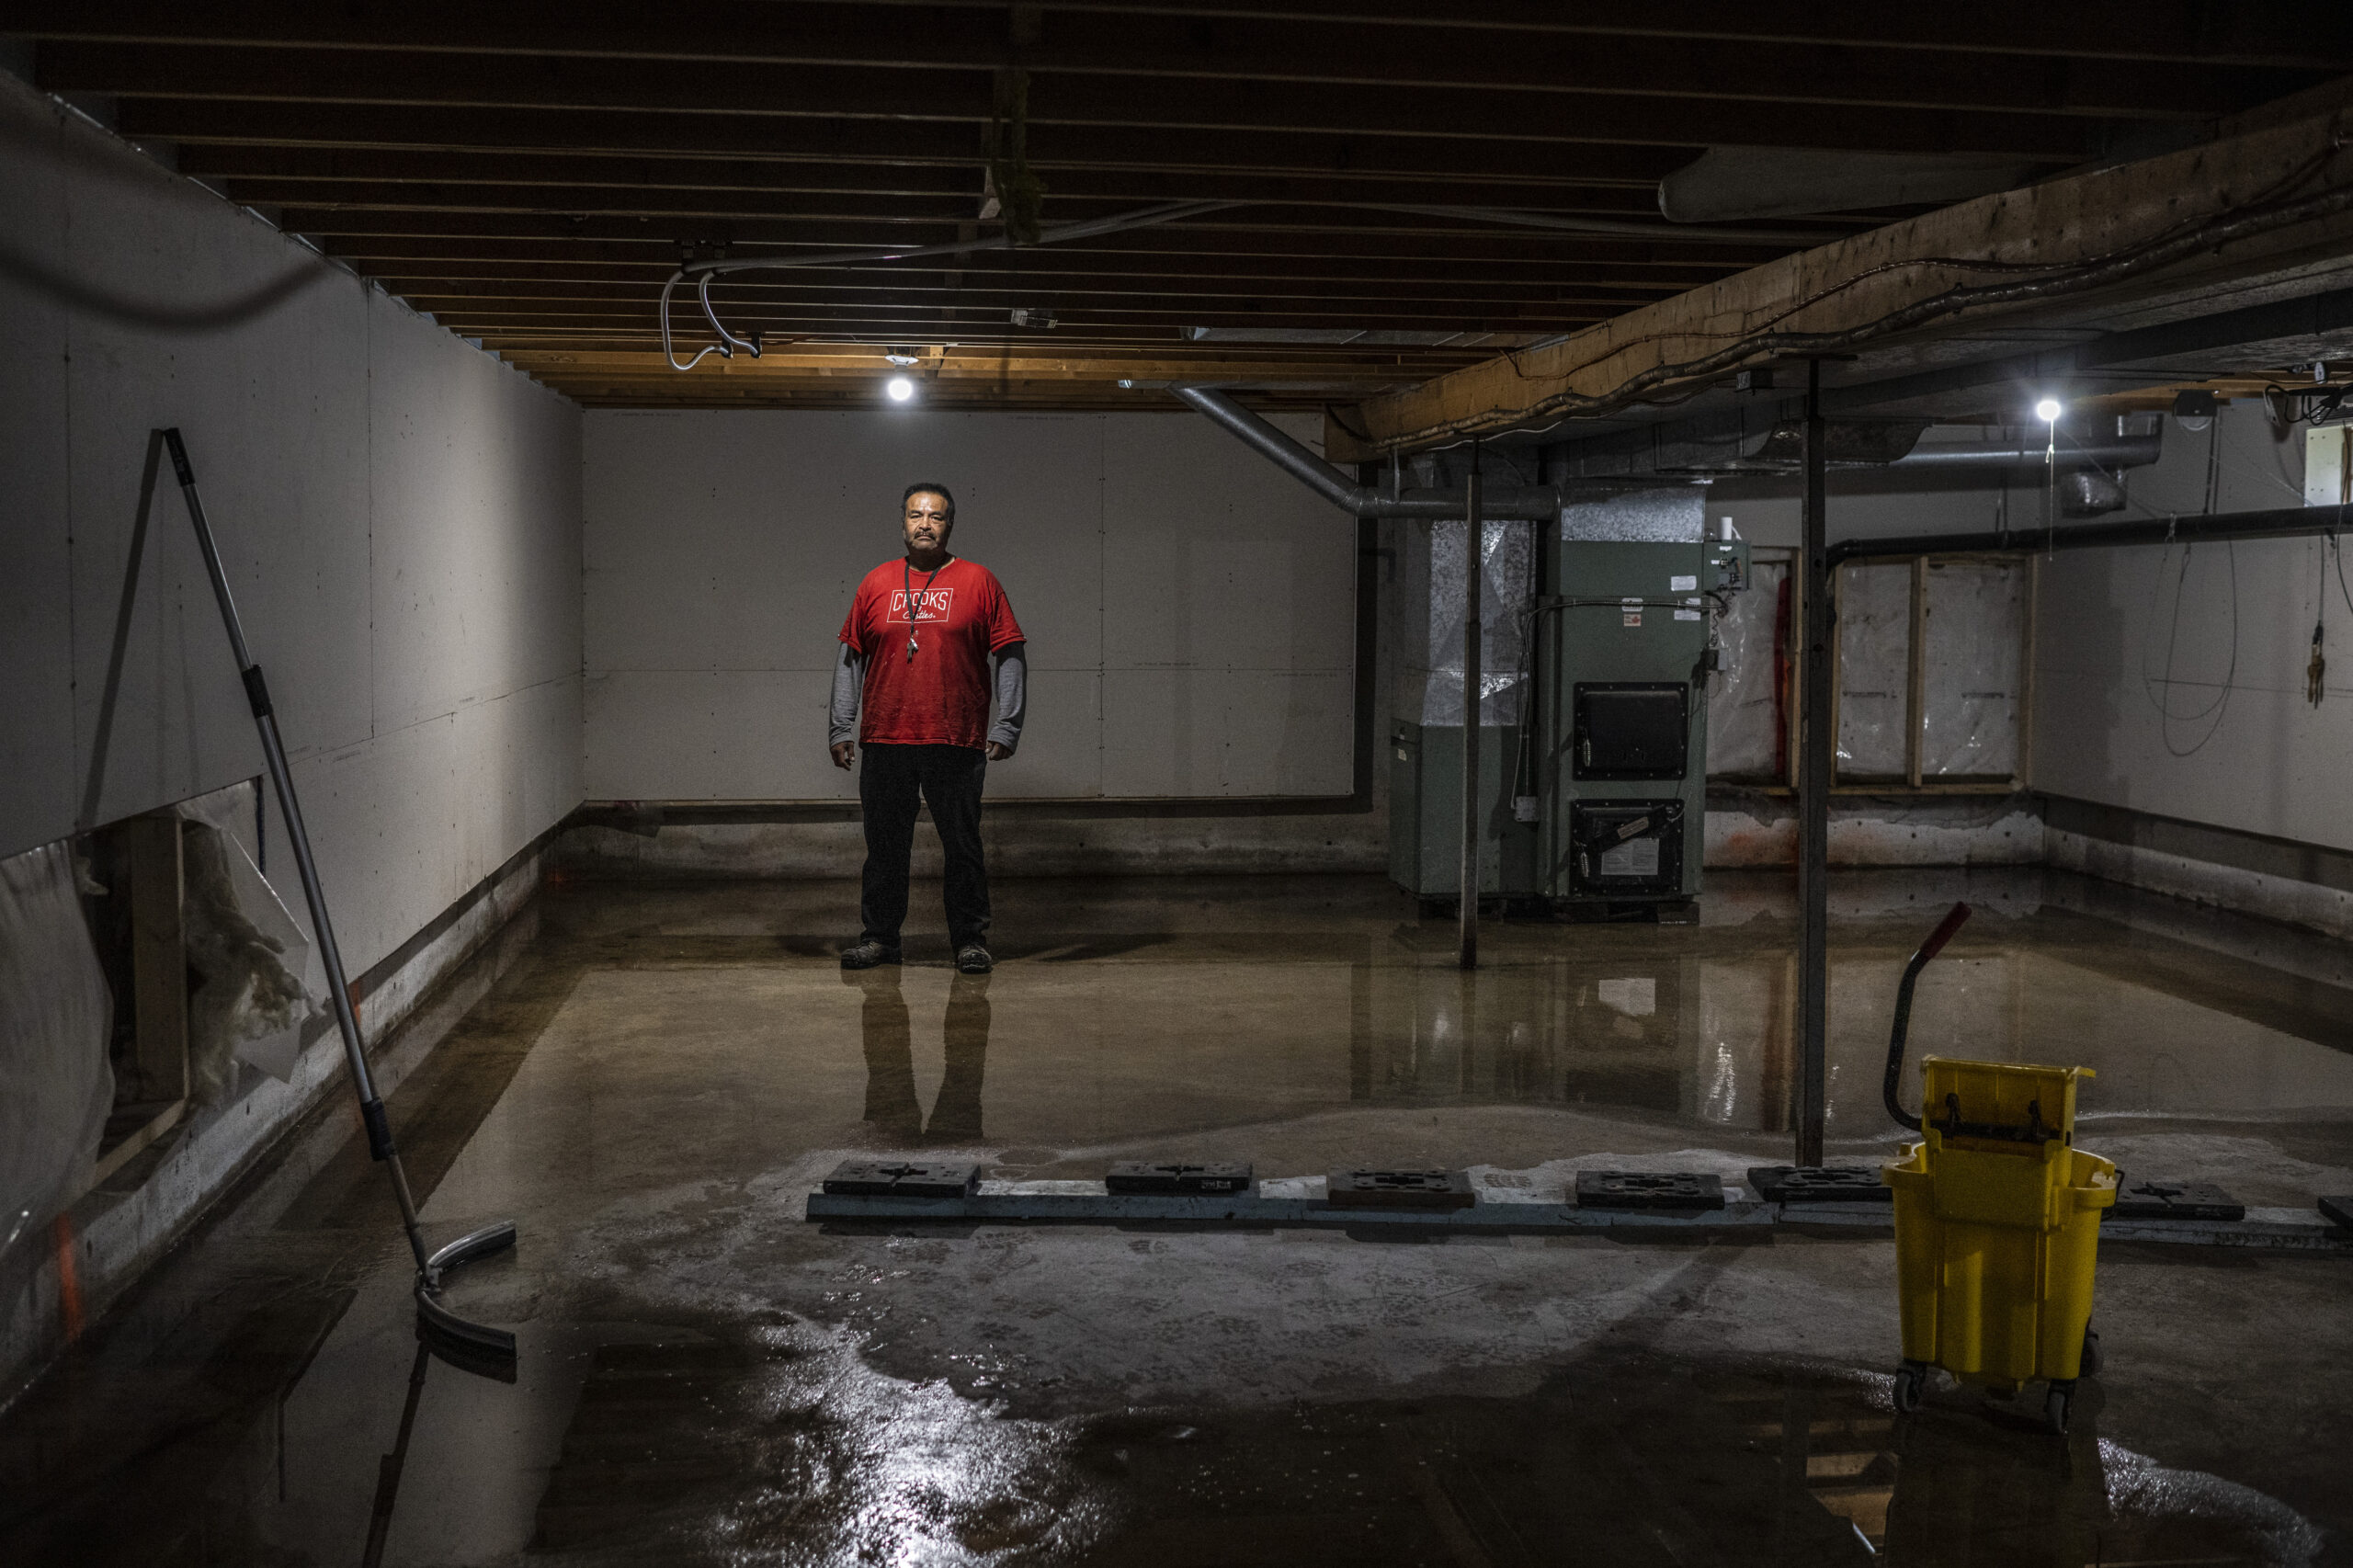 A man in a red shirt stands under a single lit bulb in a dark basement with water from a flood covering the floor. A long-armed, curved squeegee leans against the wall in the foreground